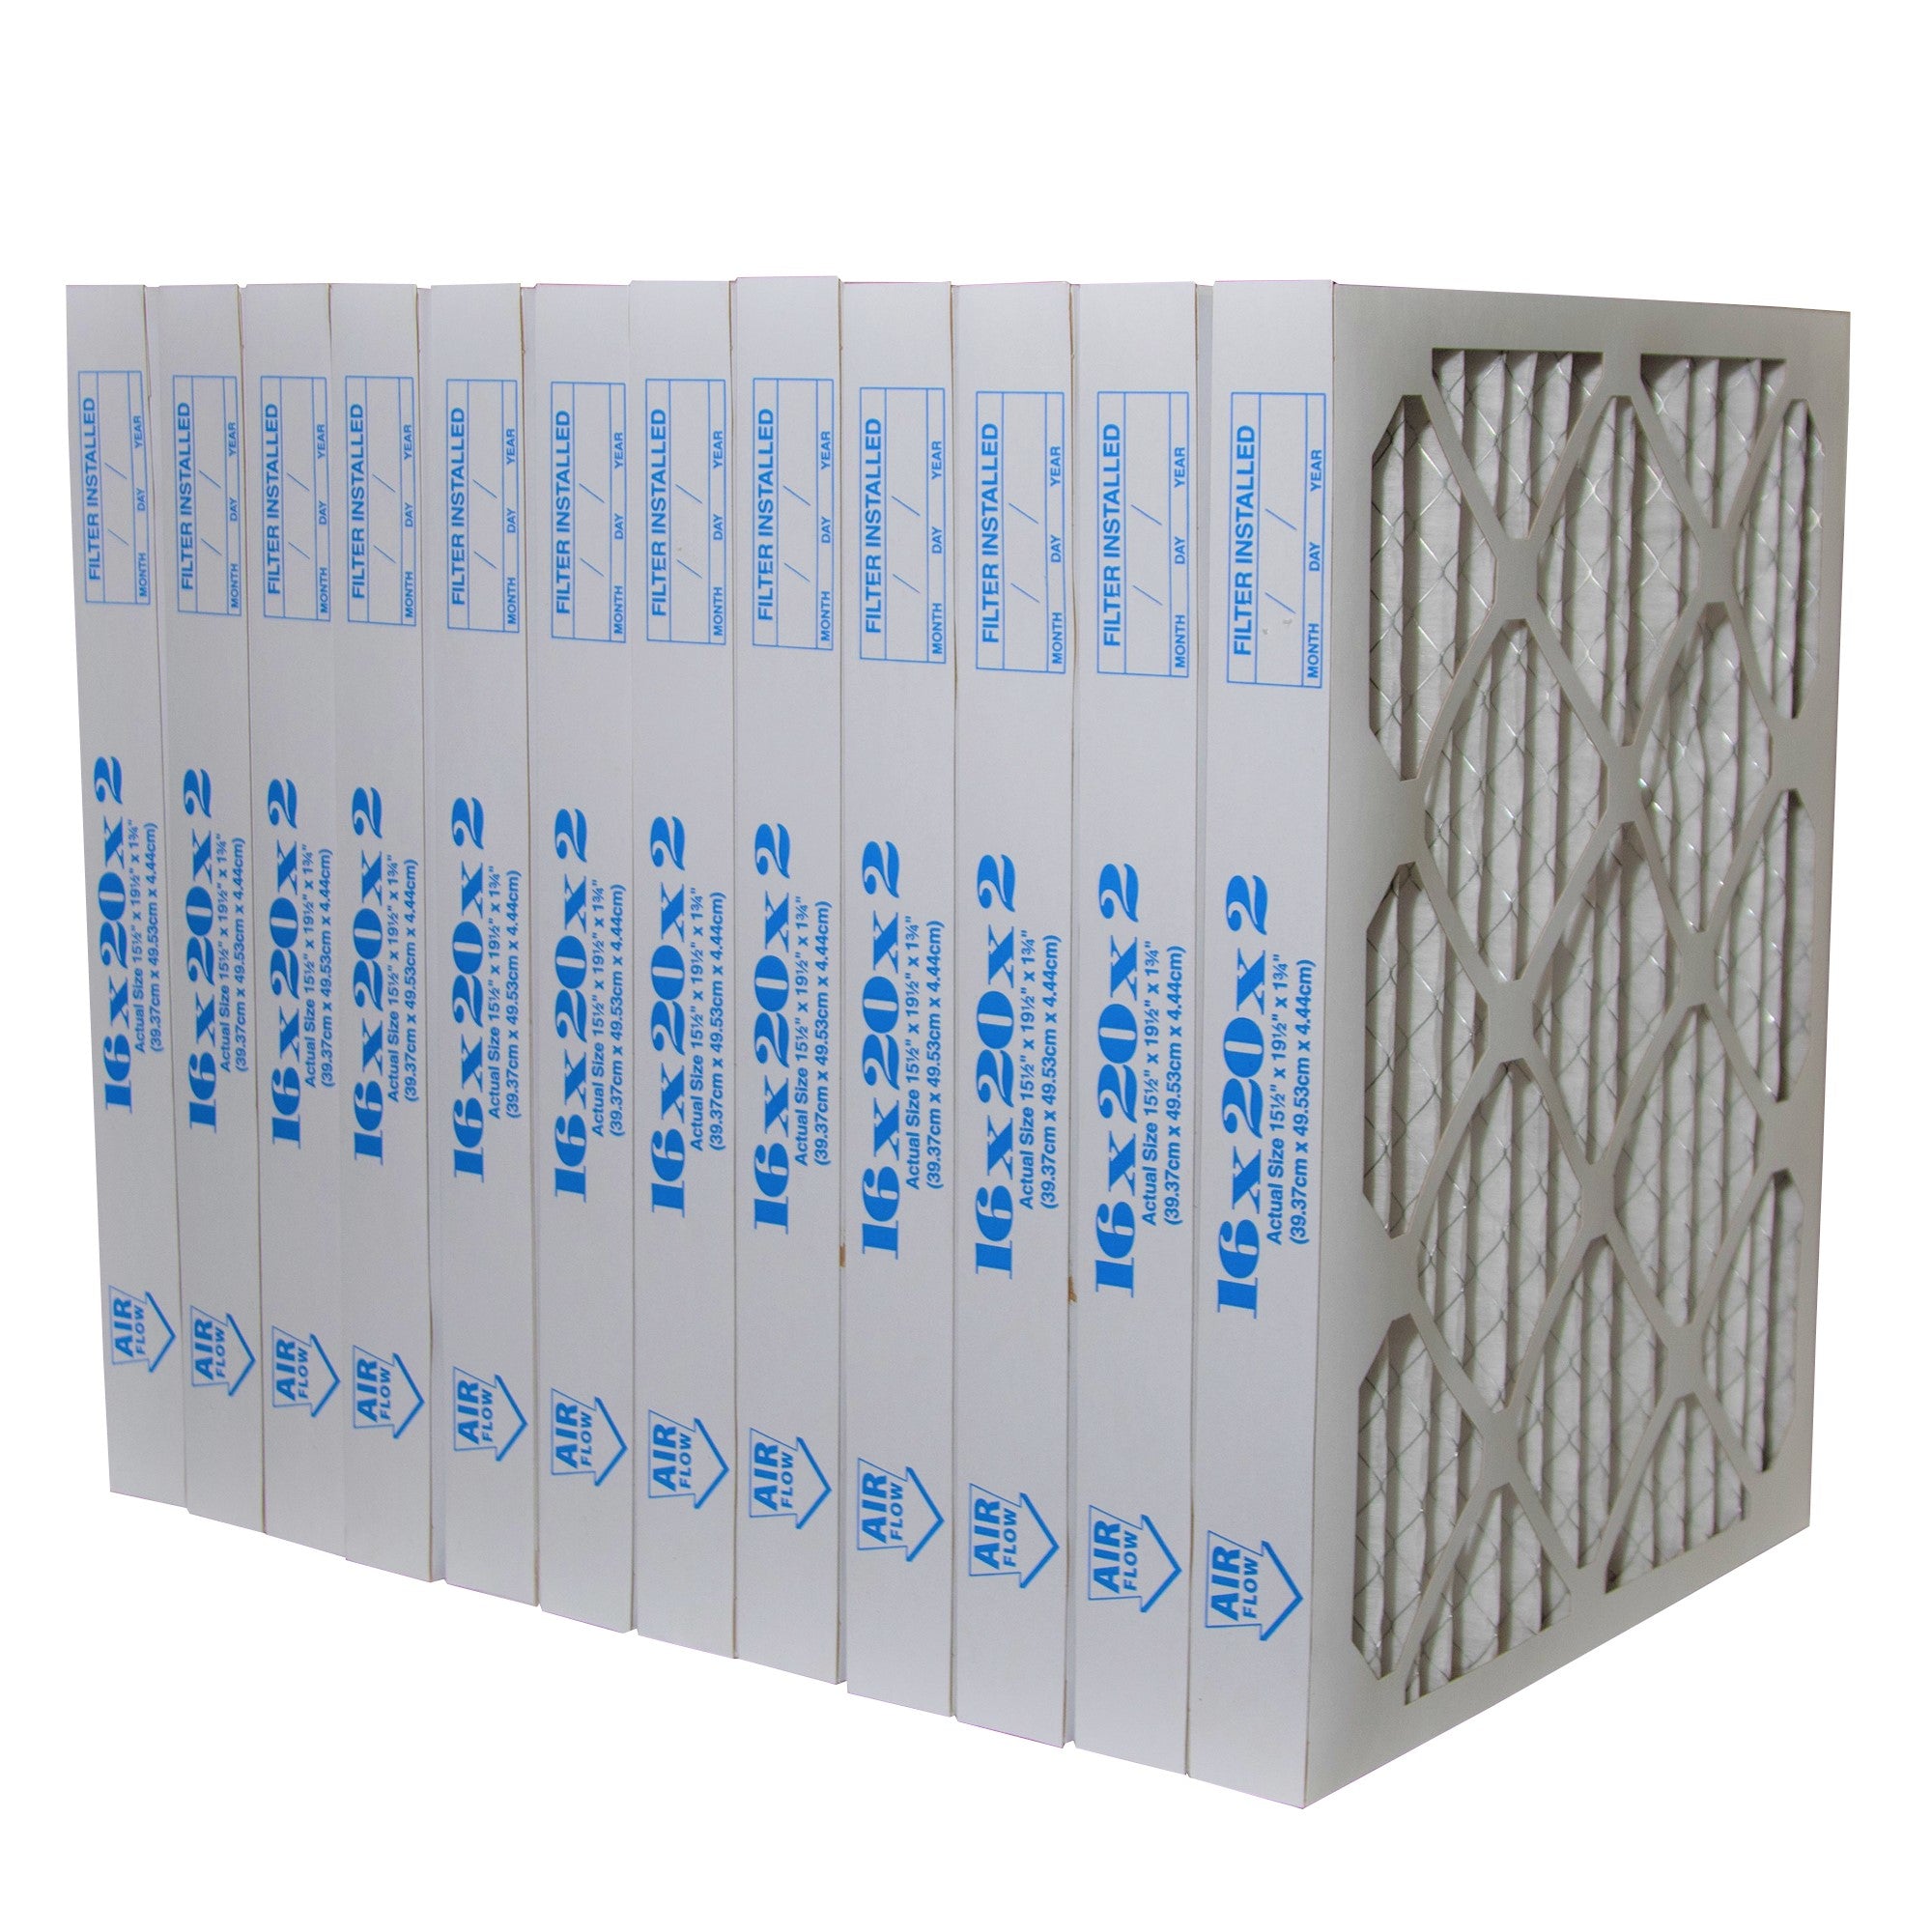 Dafco 16 x 20 x 2 Pleated Filters. MERV 8 Rated. Case of 12